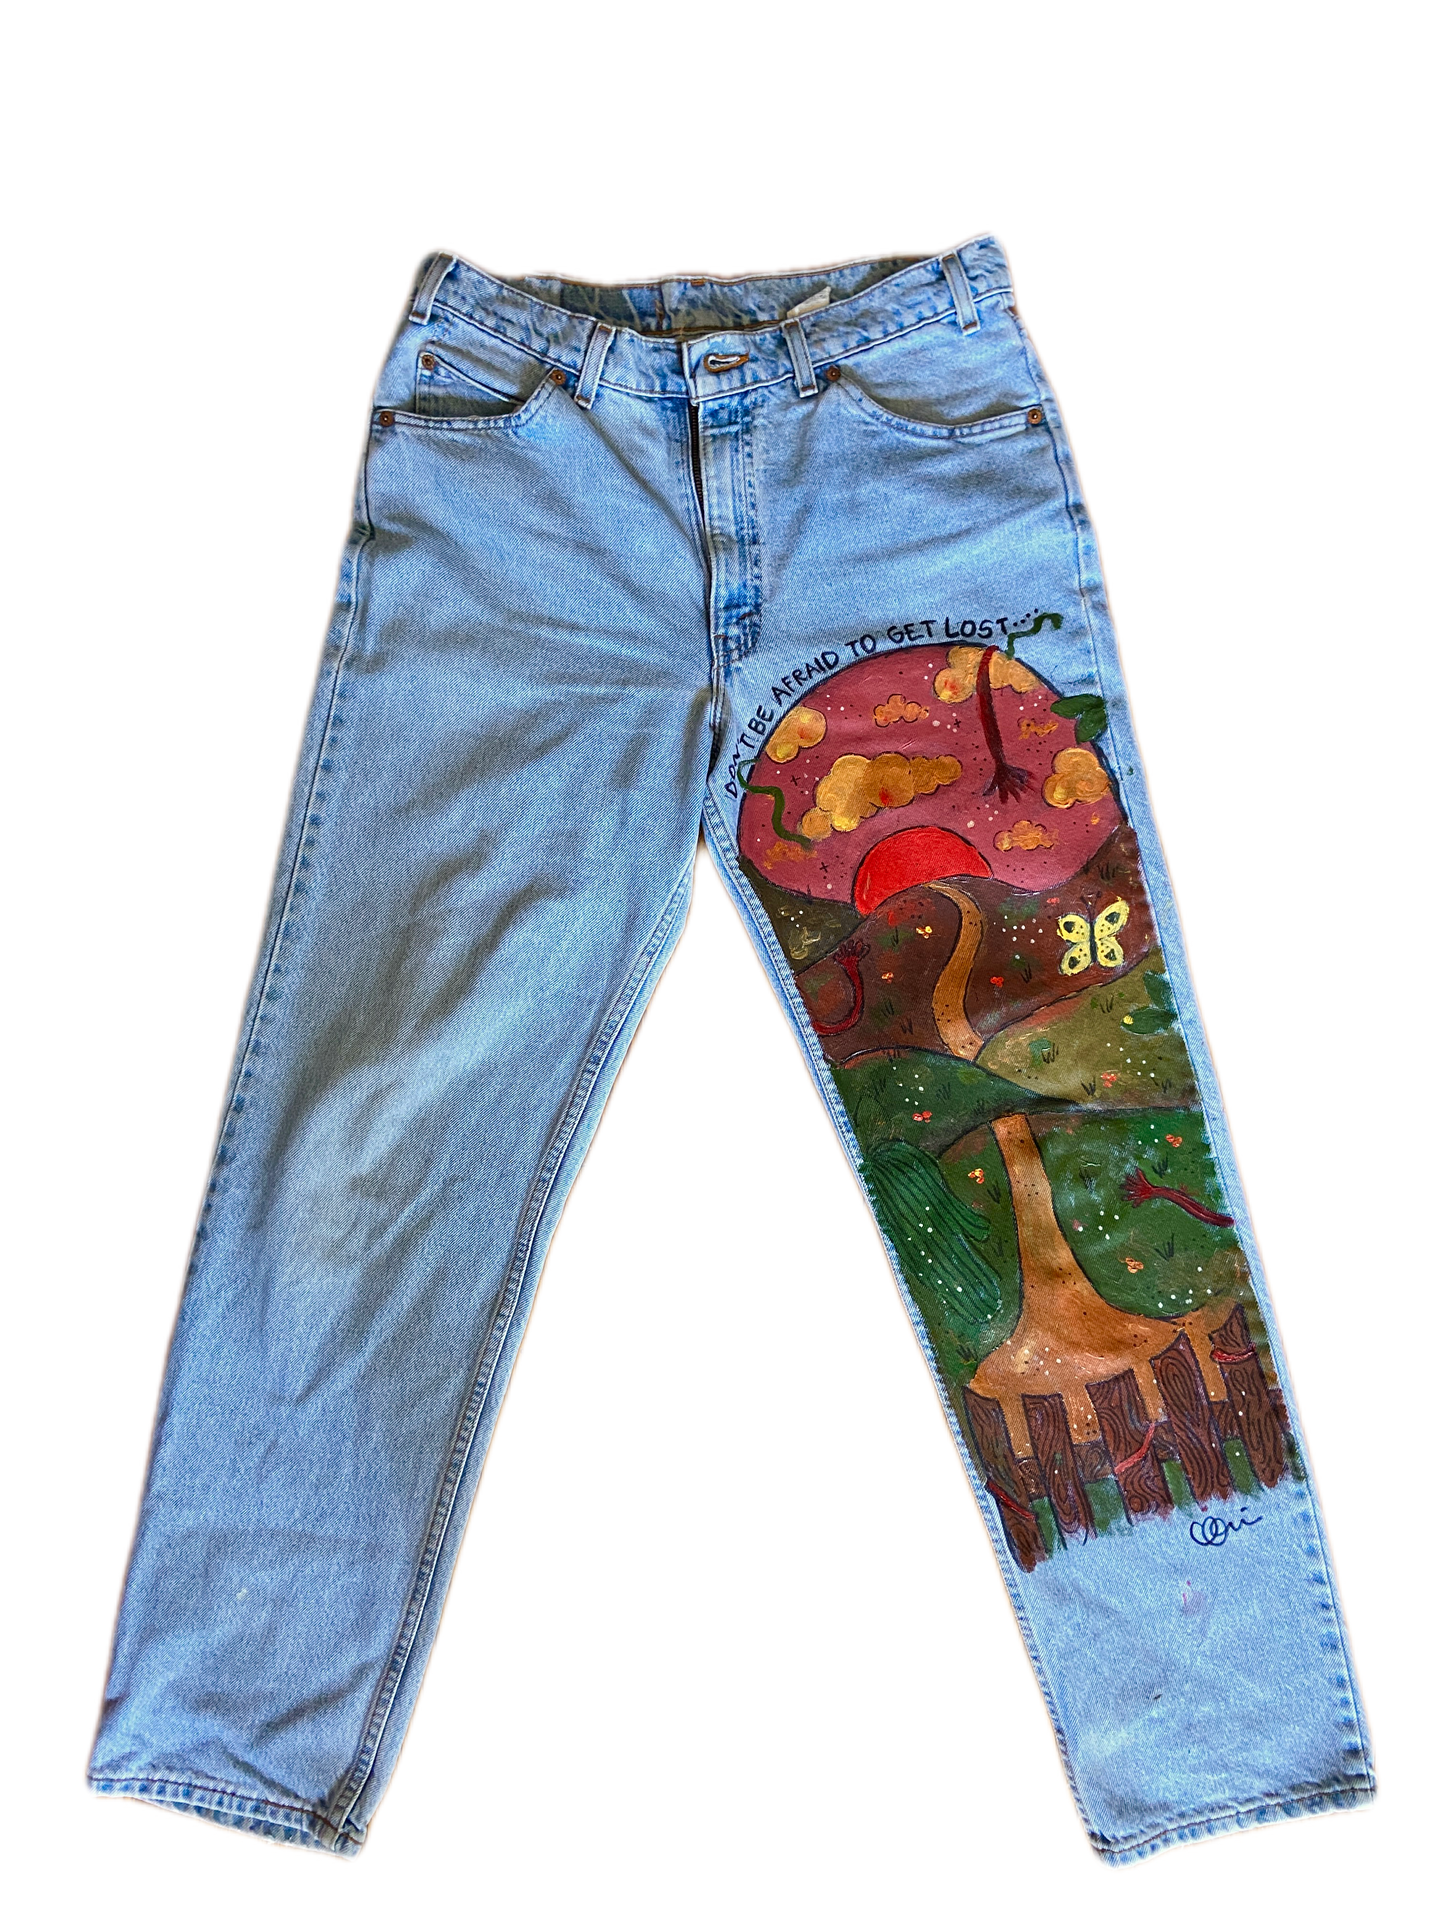 don't be afraid to get lost" hand-painted jeans! [1 of 1]